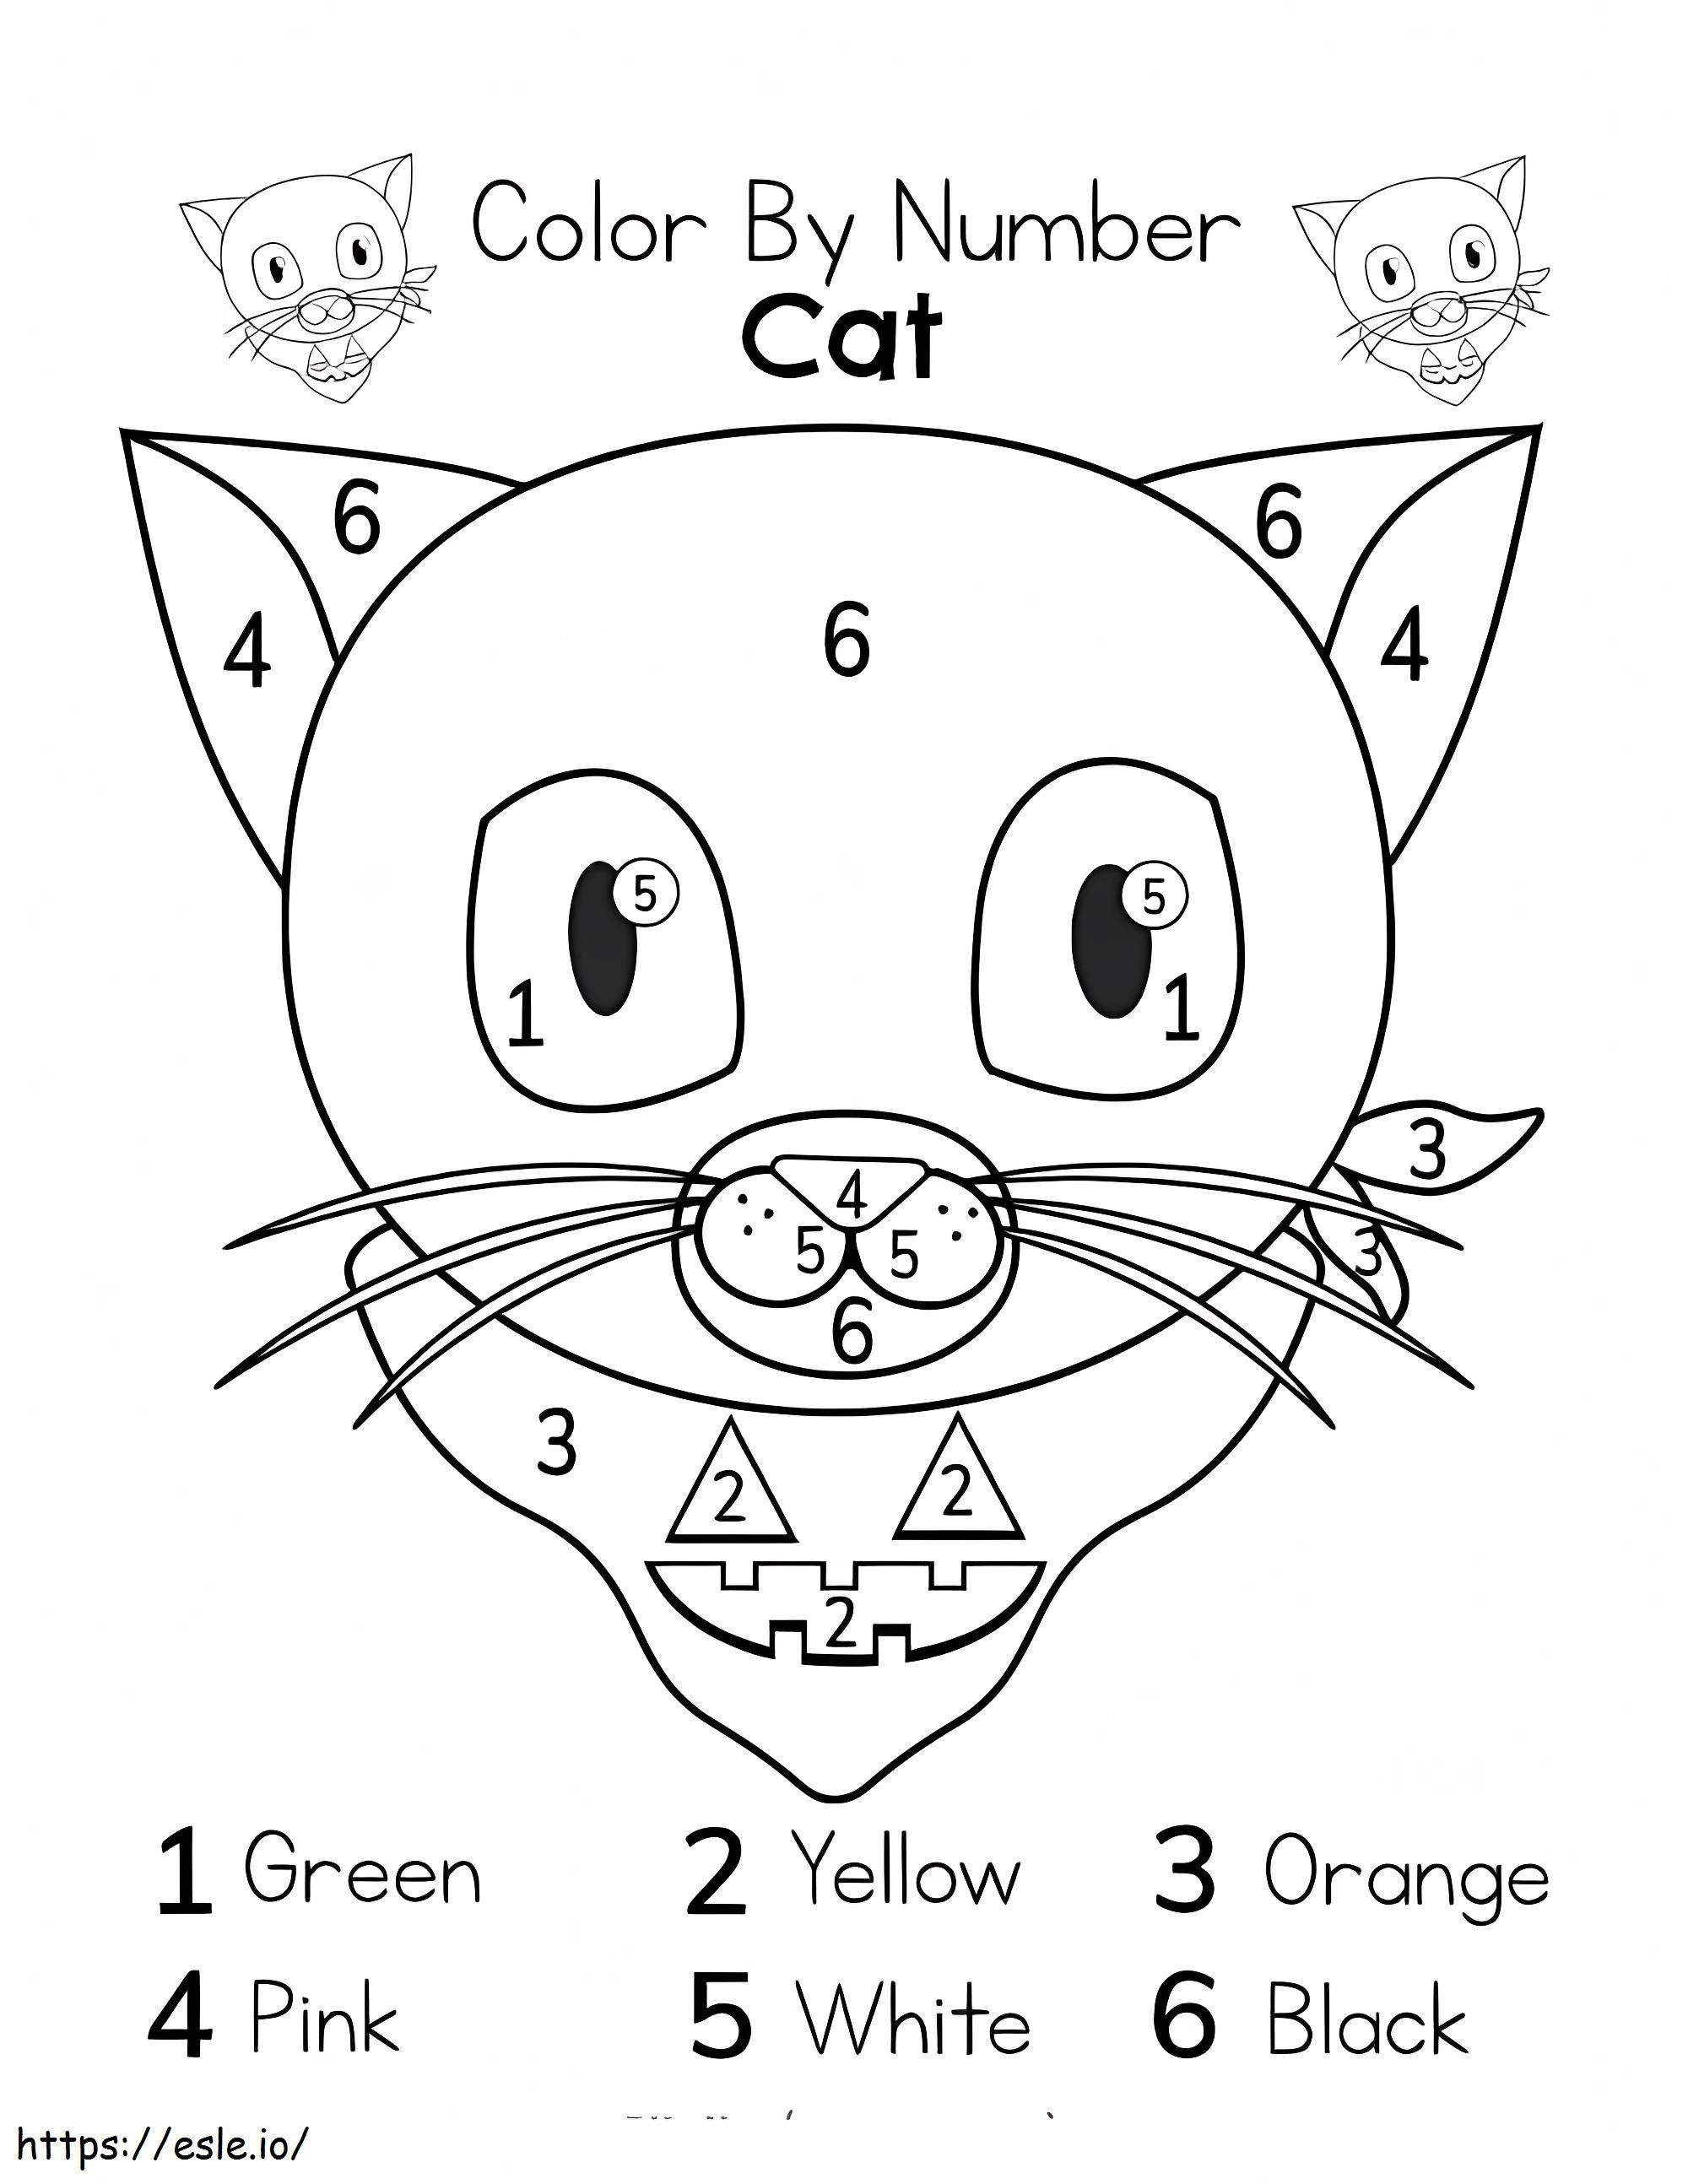 Halloween Black Cat Color By Number coloring page